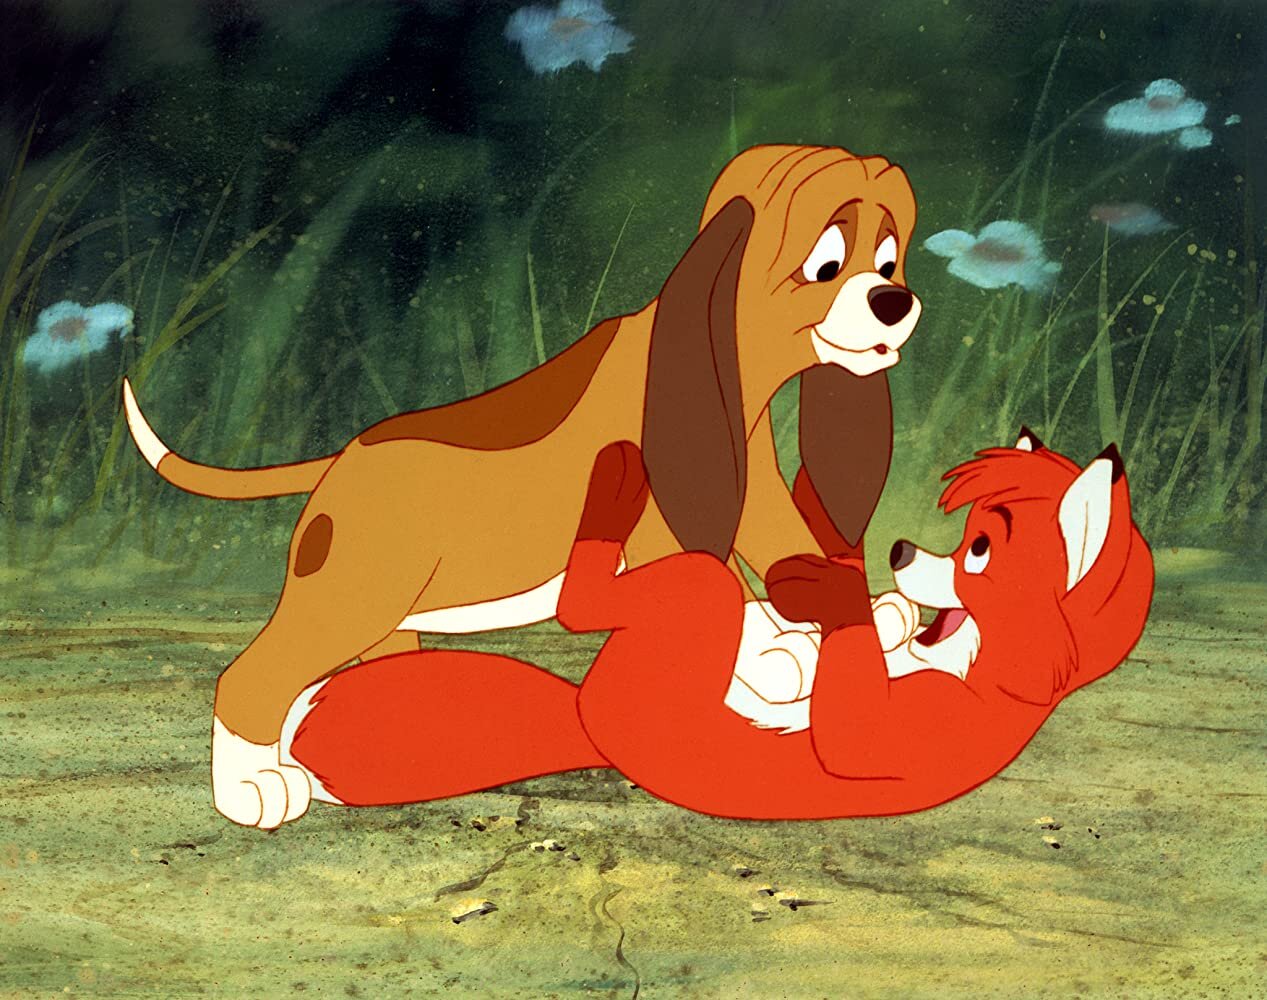 Disney - The Fox and the Hound